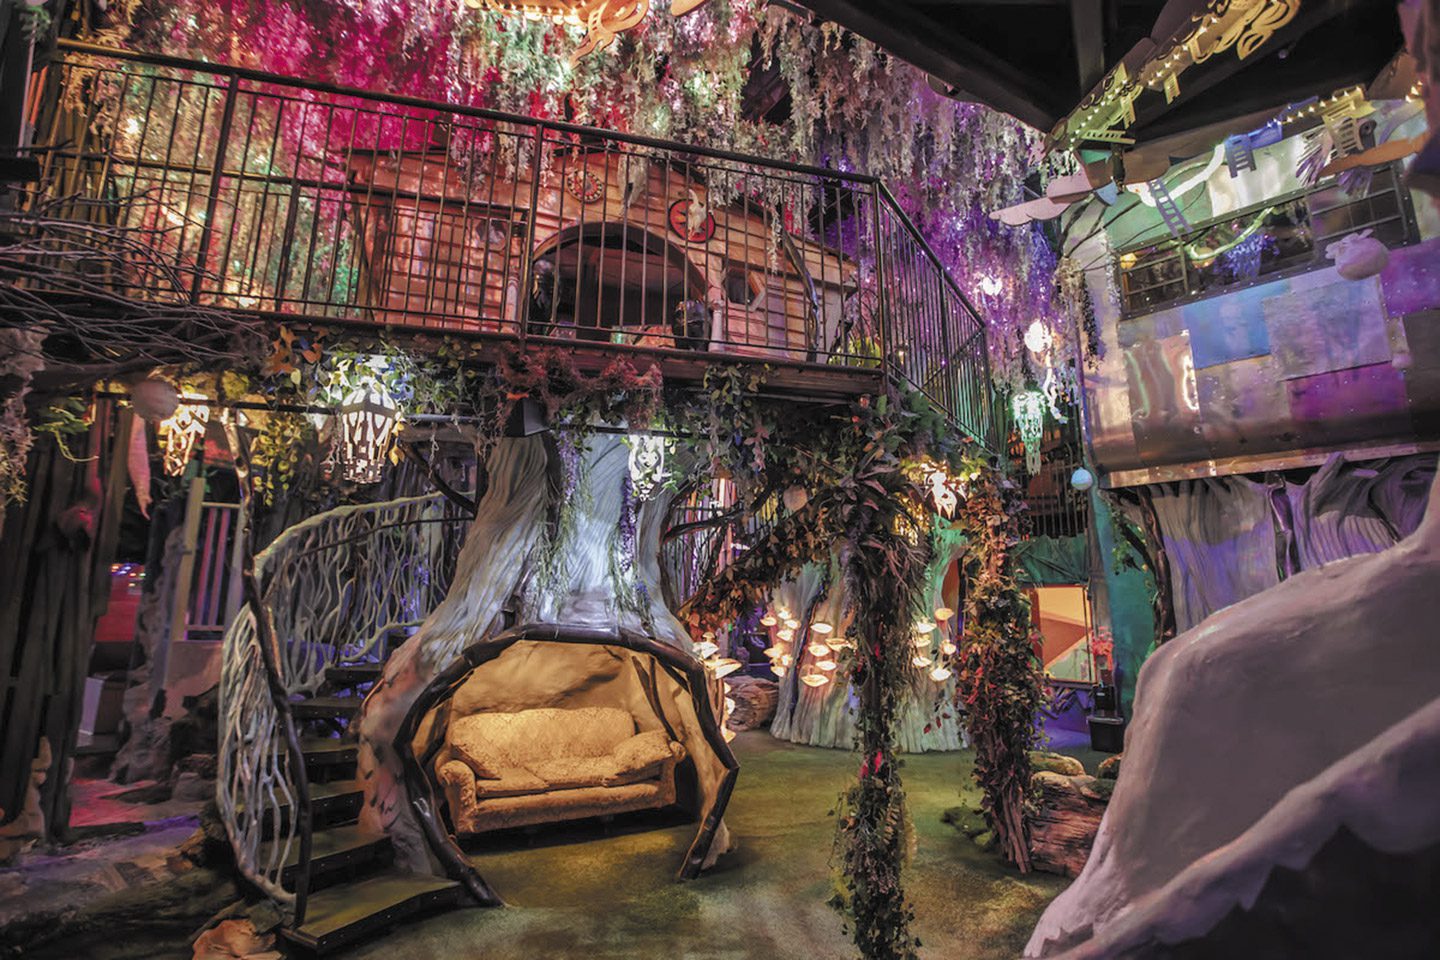 The-Forest_Photo-by-Kennedy-Cottrell_House of Eternal Return: The Original Meow Wolf by Jordan Rumsey